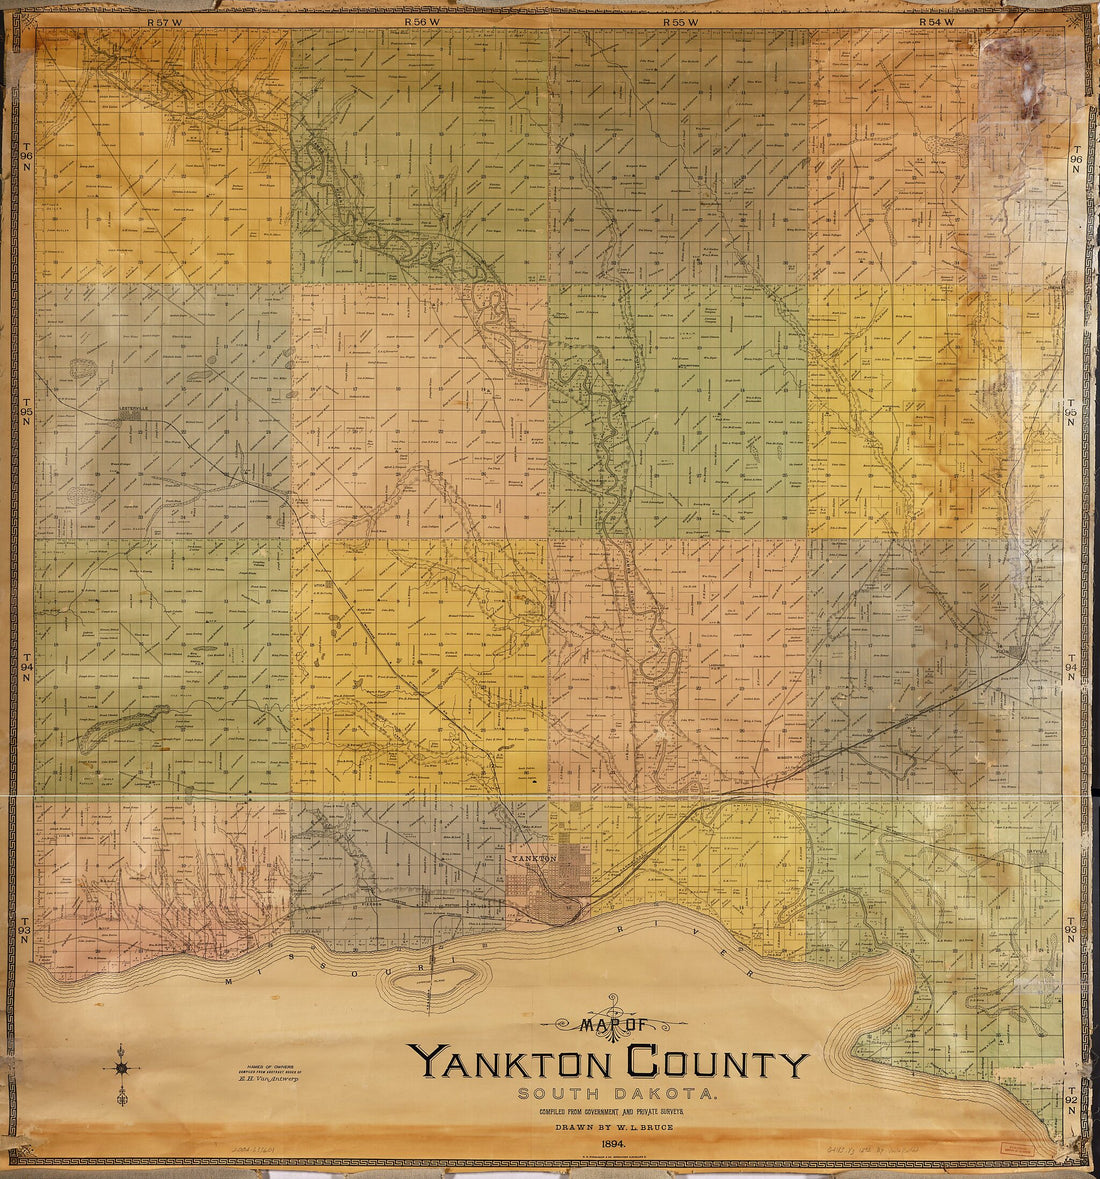 This old map of Map of Yankton County, South Dakota : Compiled from Government and Private Surveys from 1894 was created by W. L. Bruce,  H.B. Stranahan &amp; Co in 1894